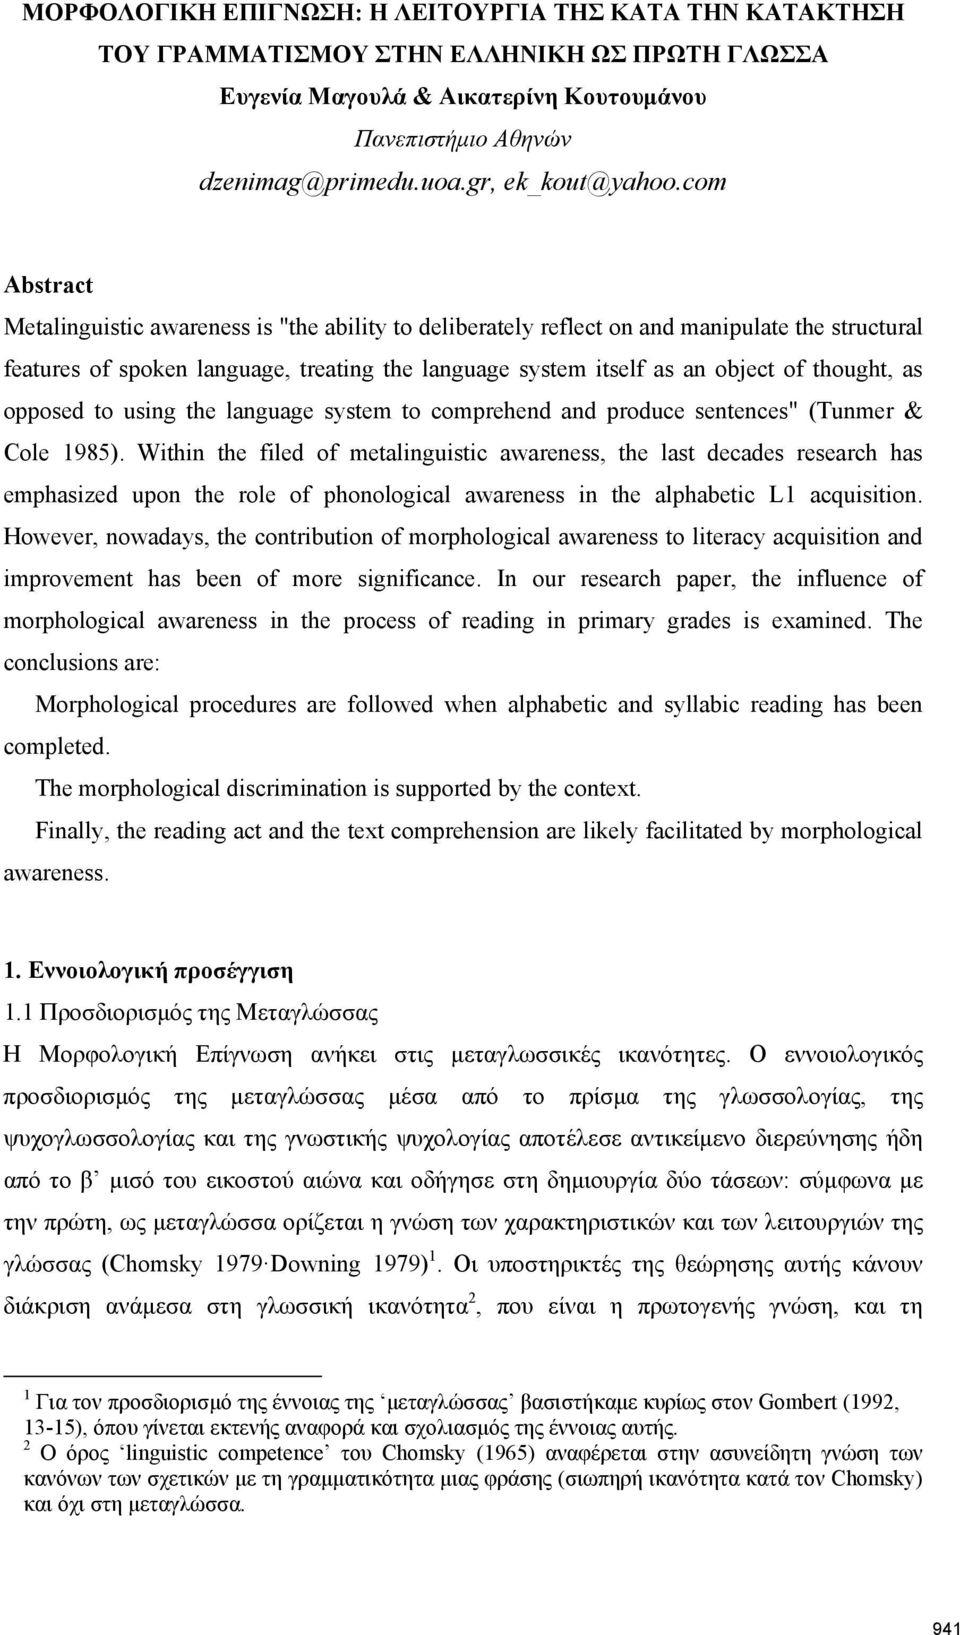 com Abstract Metalinguistic awareness is "the ability to deliberately reflect on and manipulate the structural features of spoken language, treating the language system itself as an object of